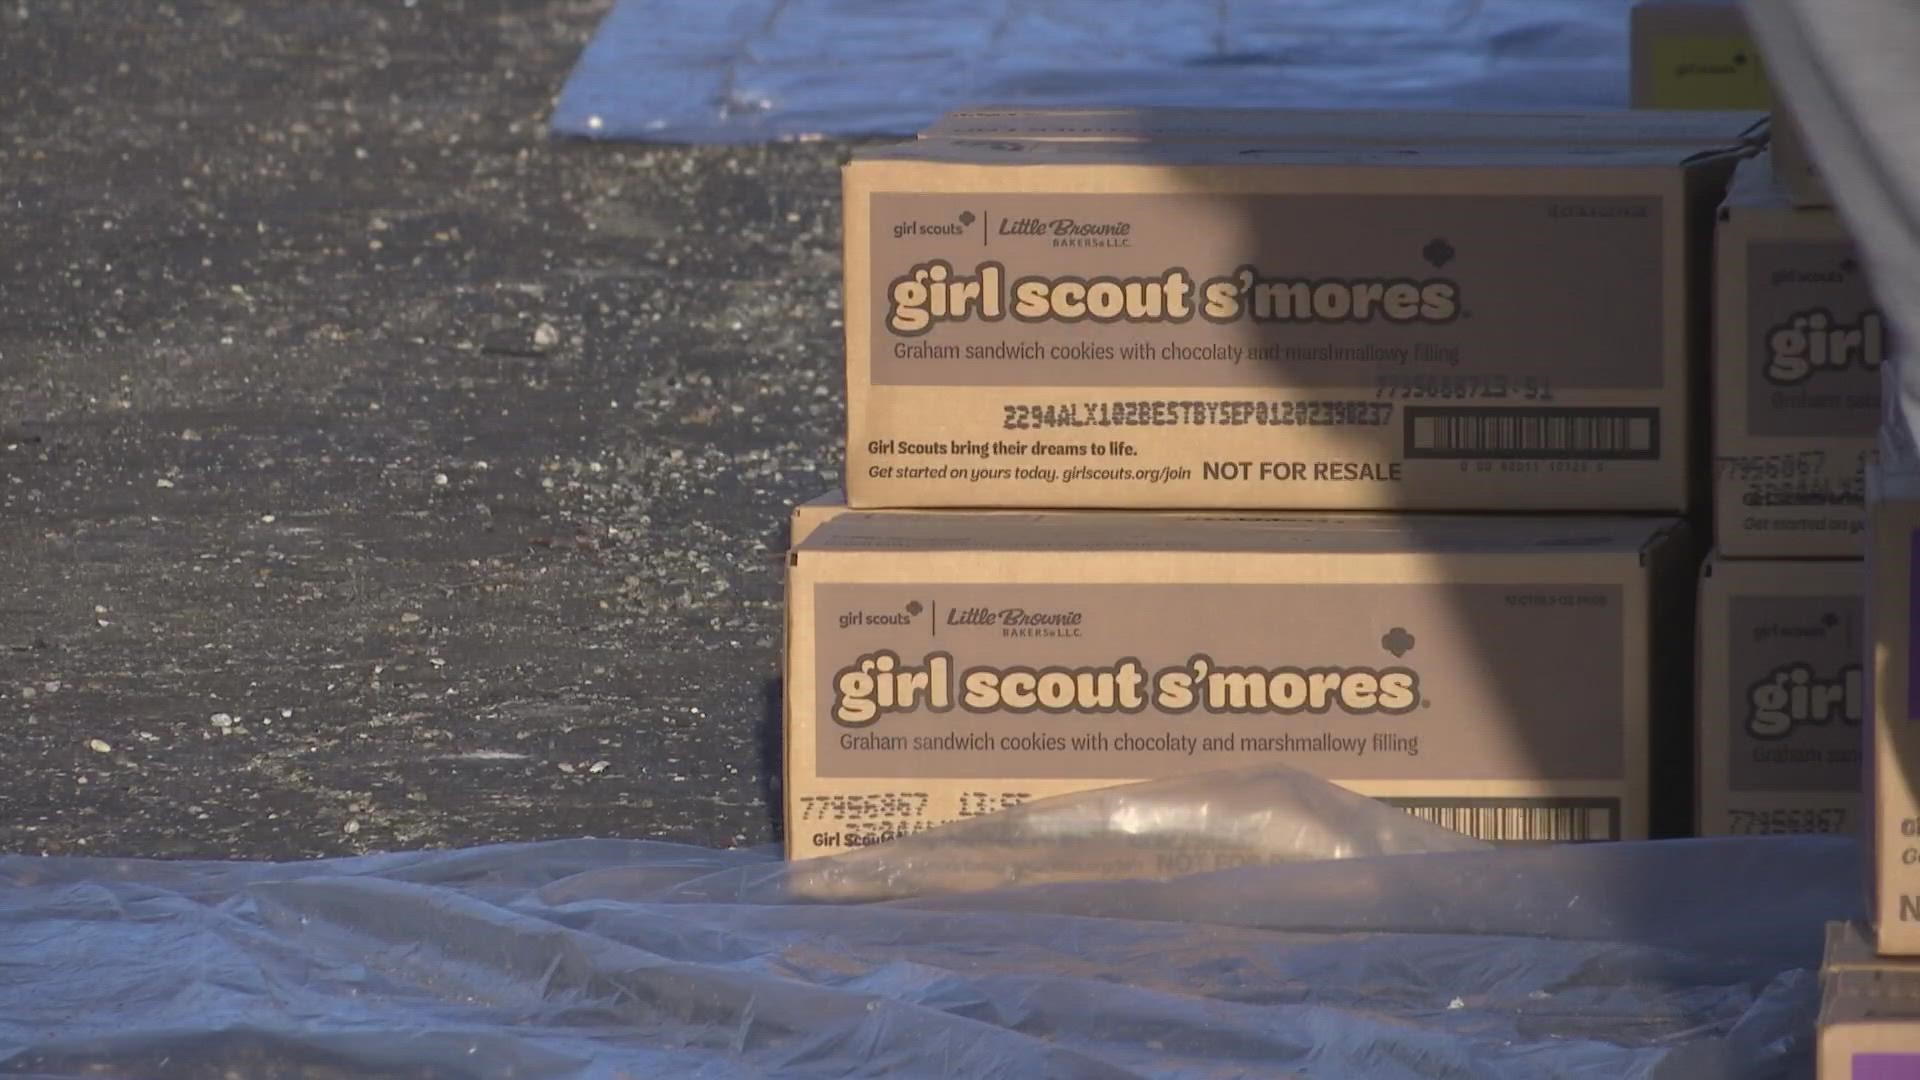 Three semi-trucks full of Girl Scout cookies rolled into town today.